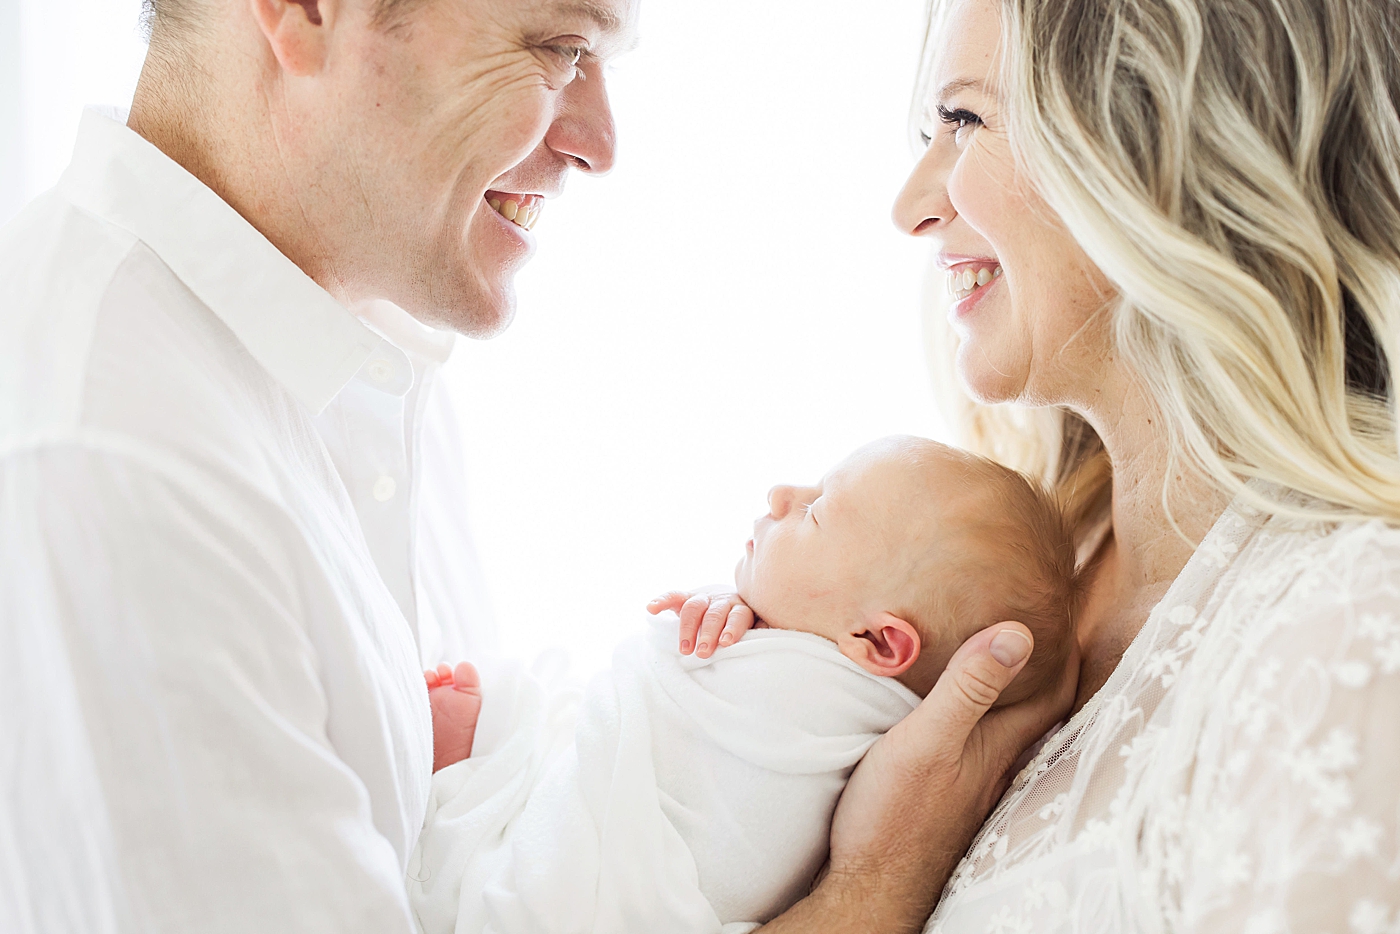 Parents looking at each other and smiling as they hold their newborn son. Photo by Fresh Light Photography.